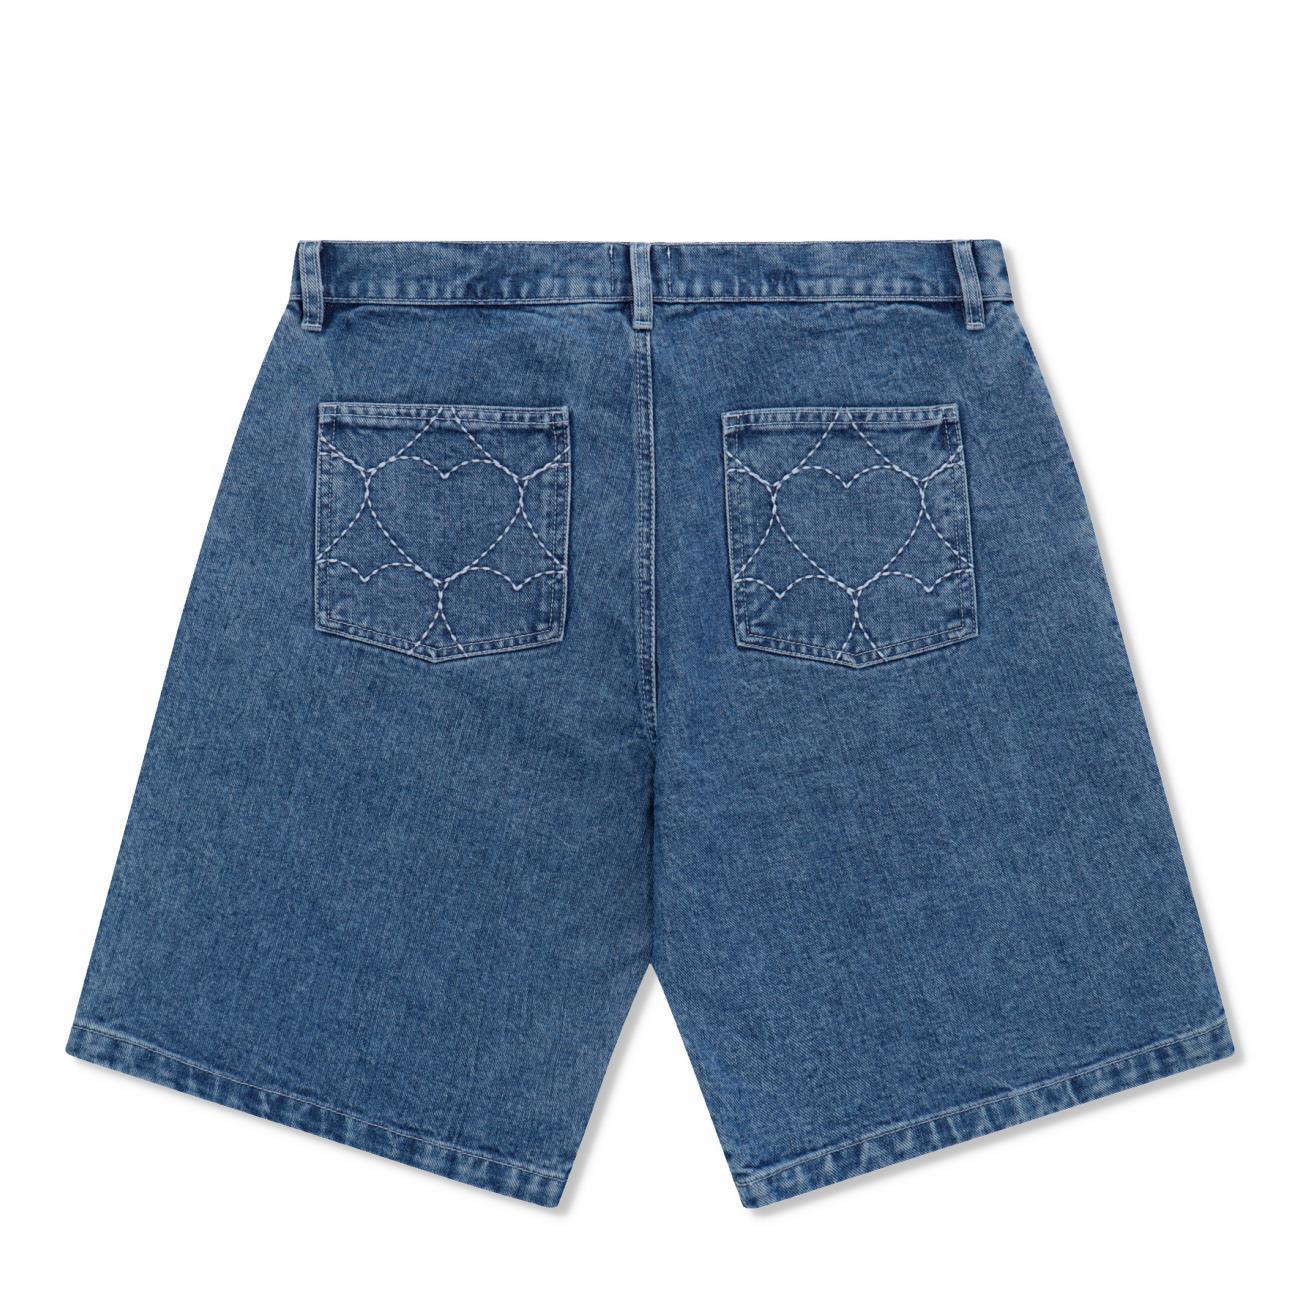 Workwear Embroidery Shorts